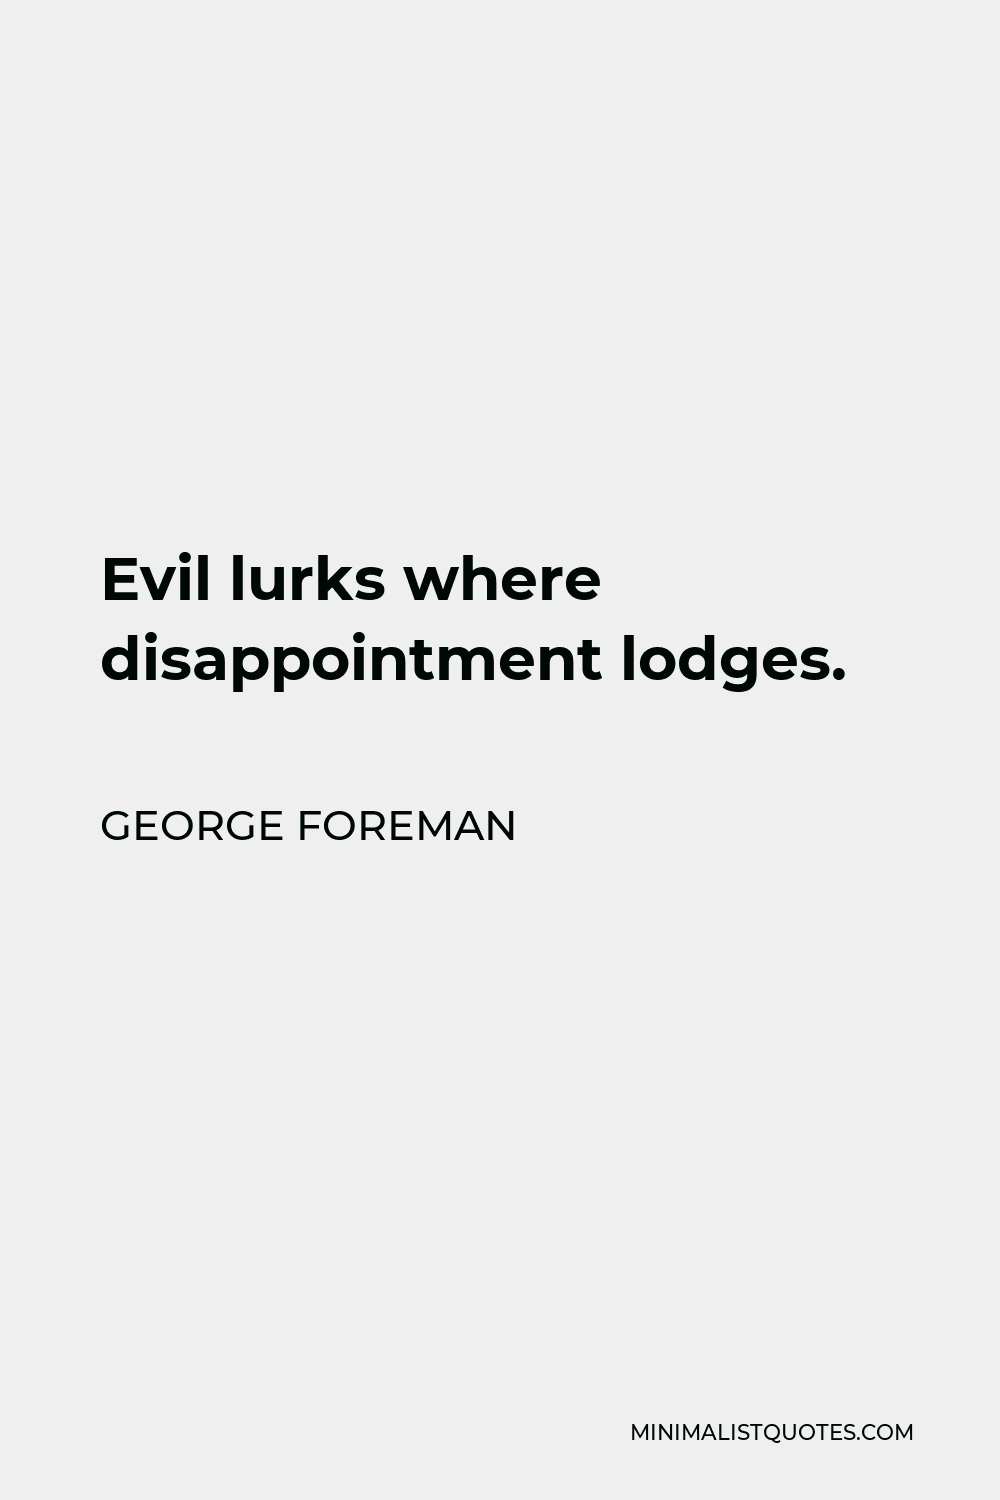 George Foreman Quote - Evil lurks where disappointment lodges.